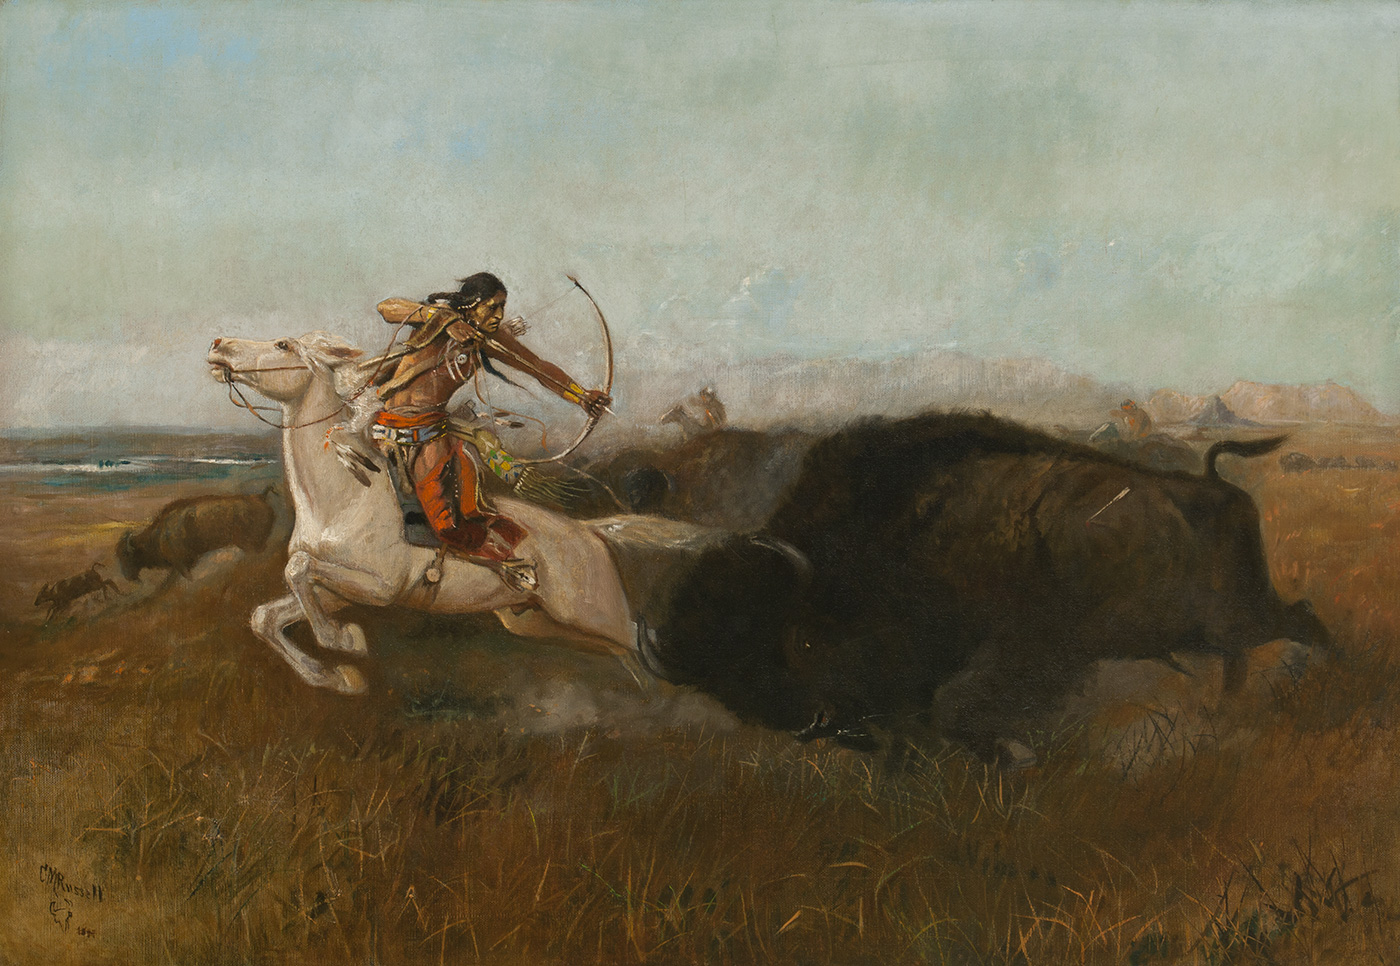 At full gallop, an indigenous American man on a white horse aims a bow and arrow at a running bison.